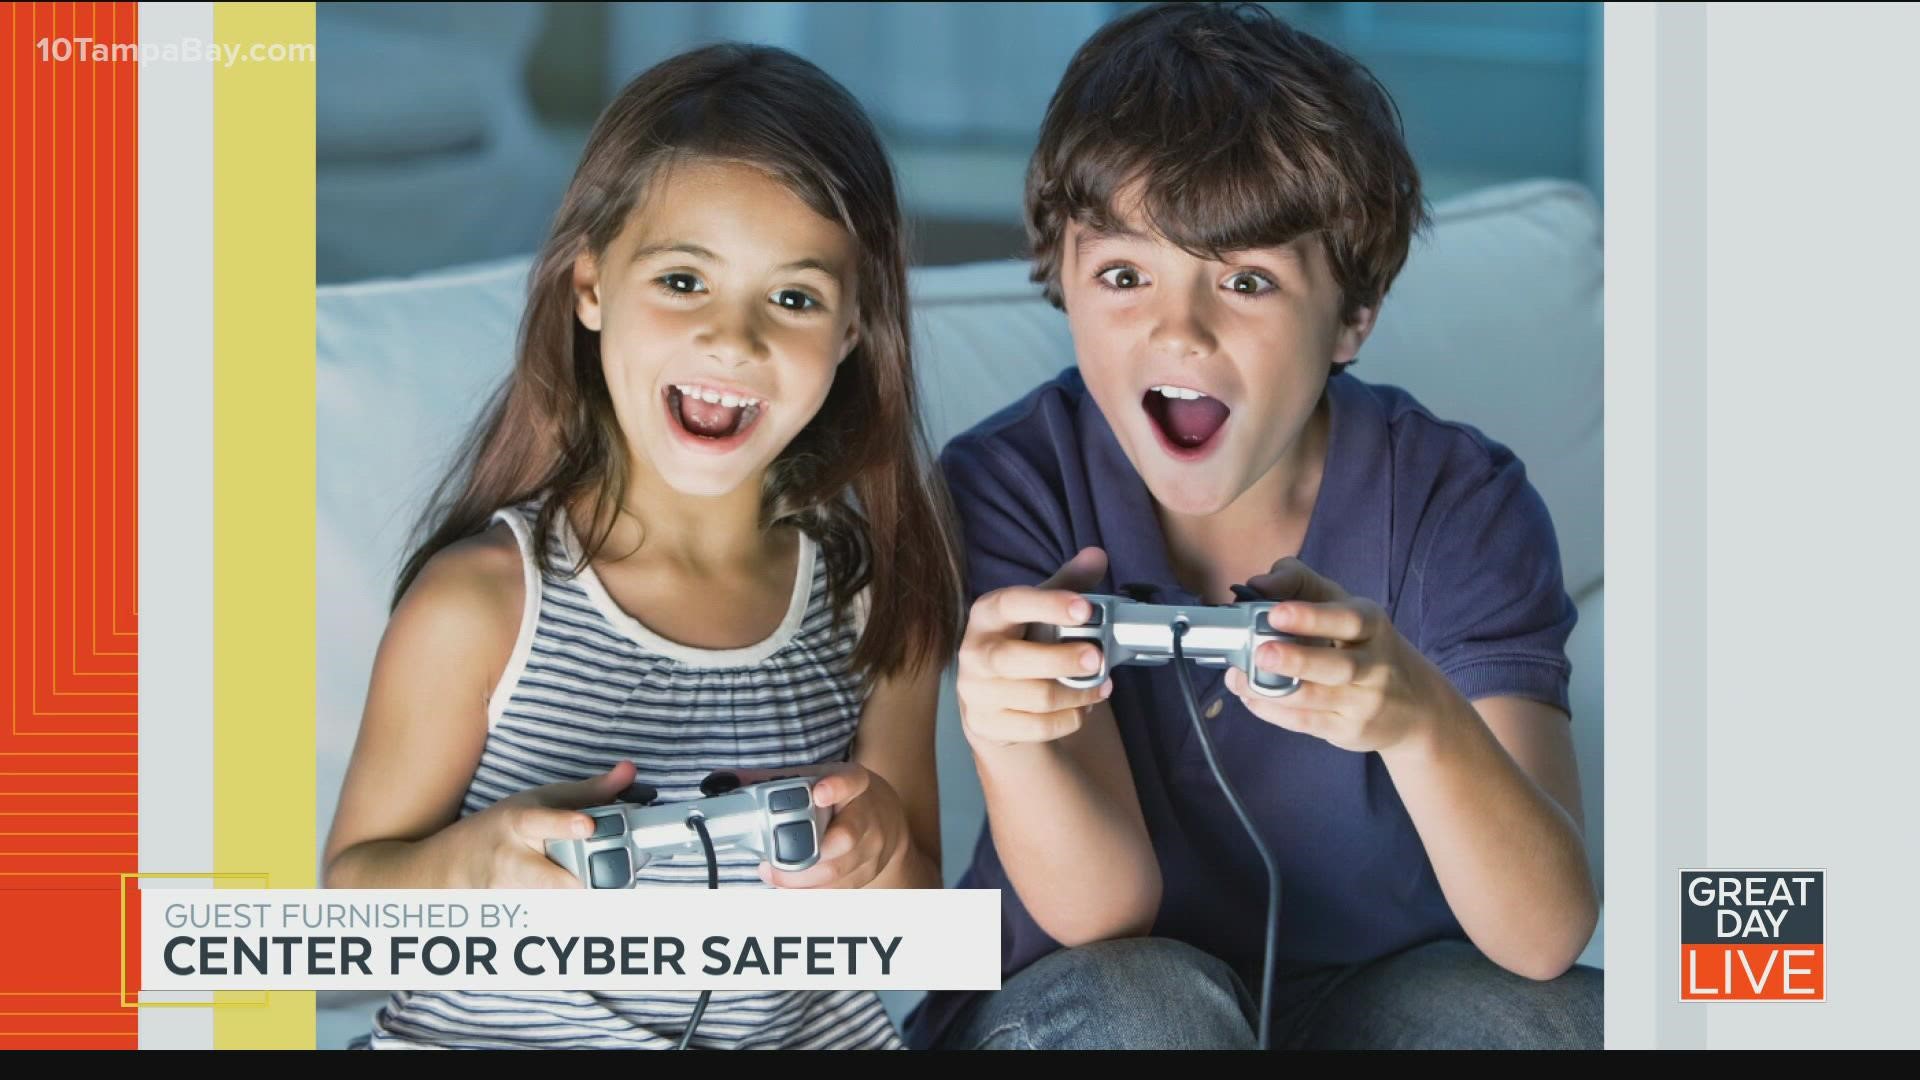 Tips on keeping kids safe when talking to others on video games